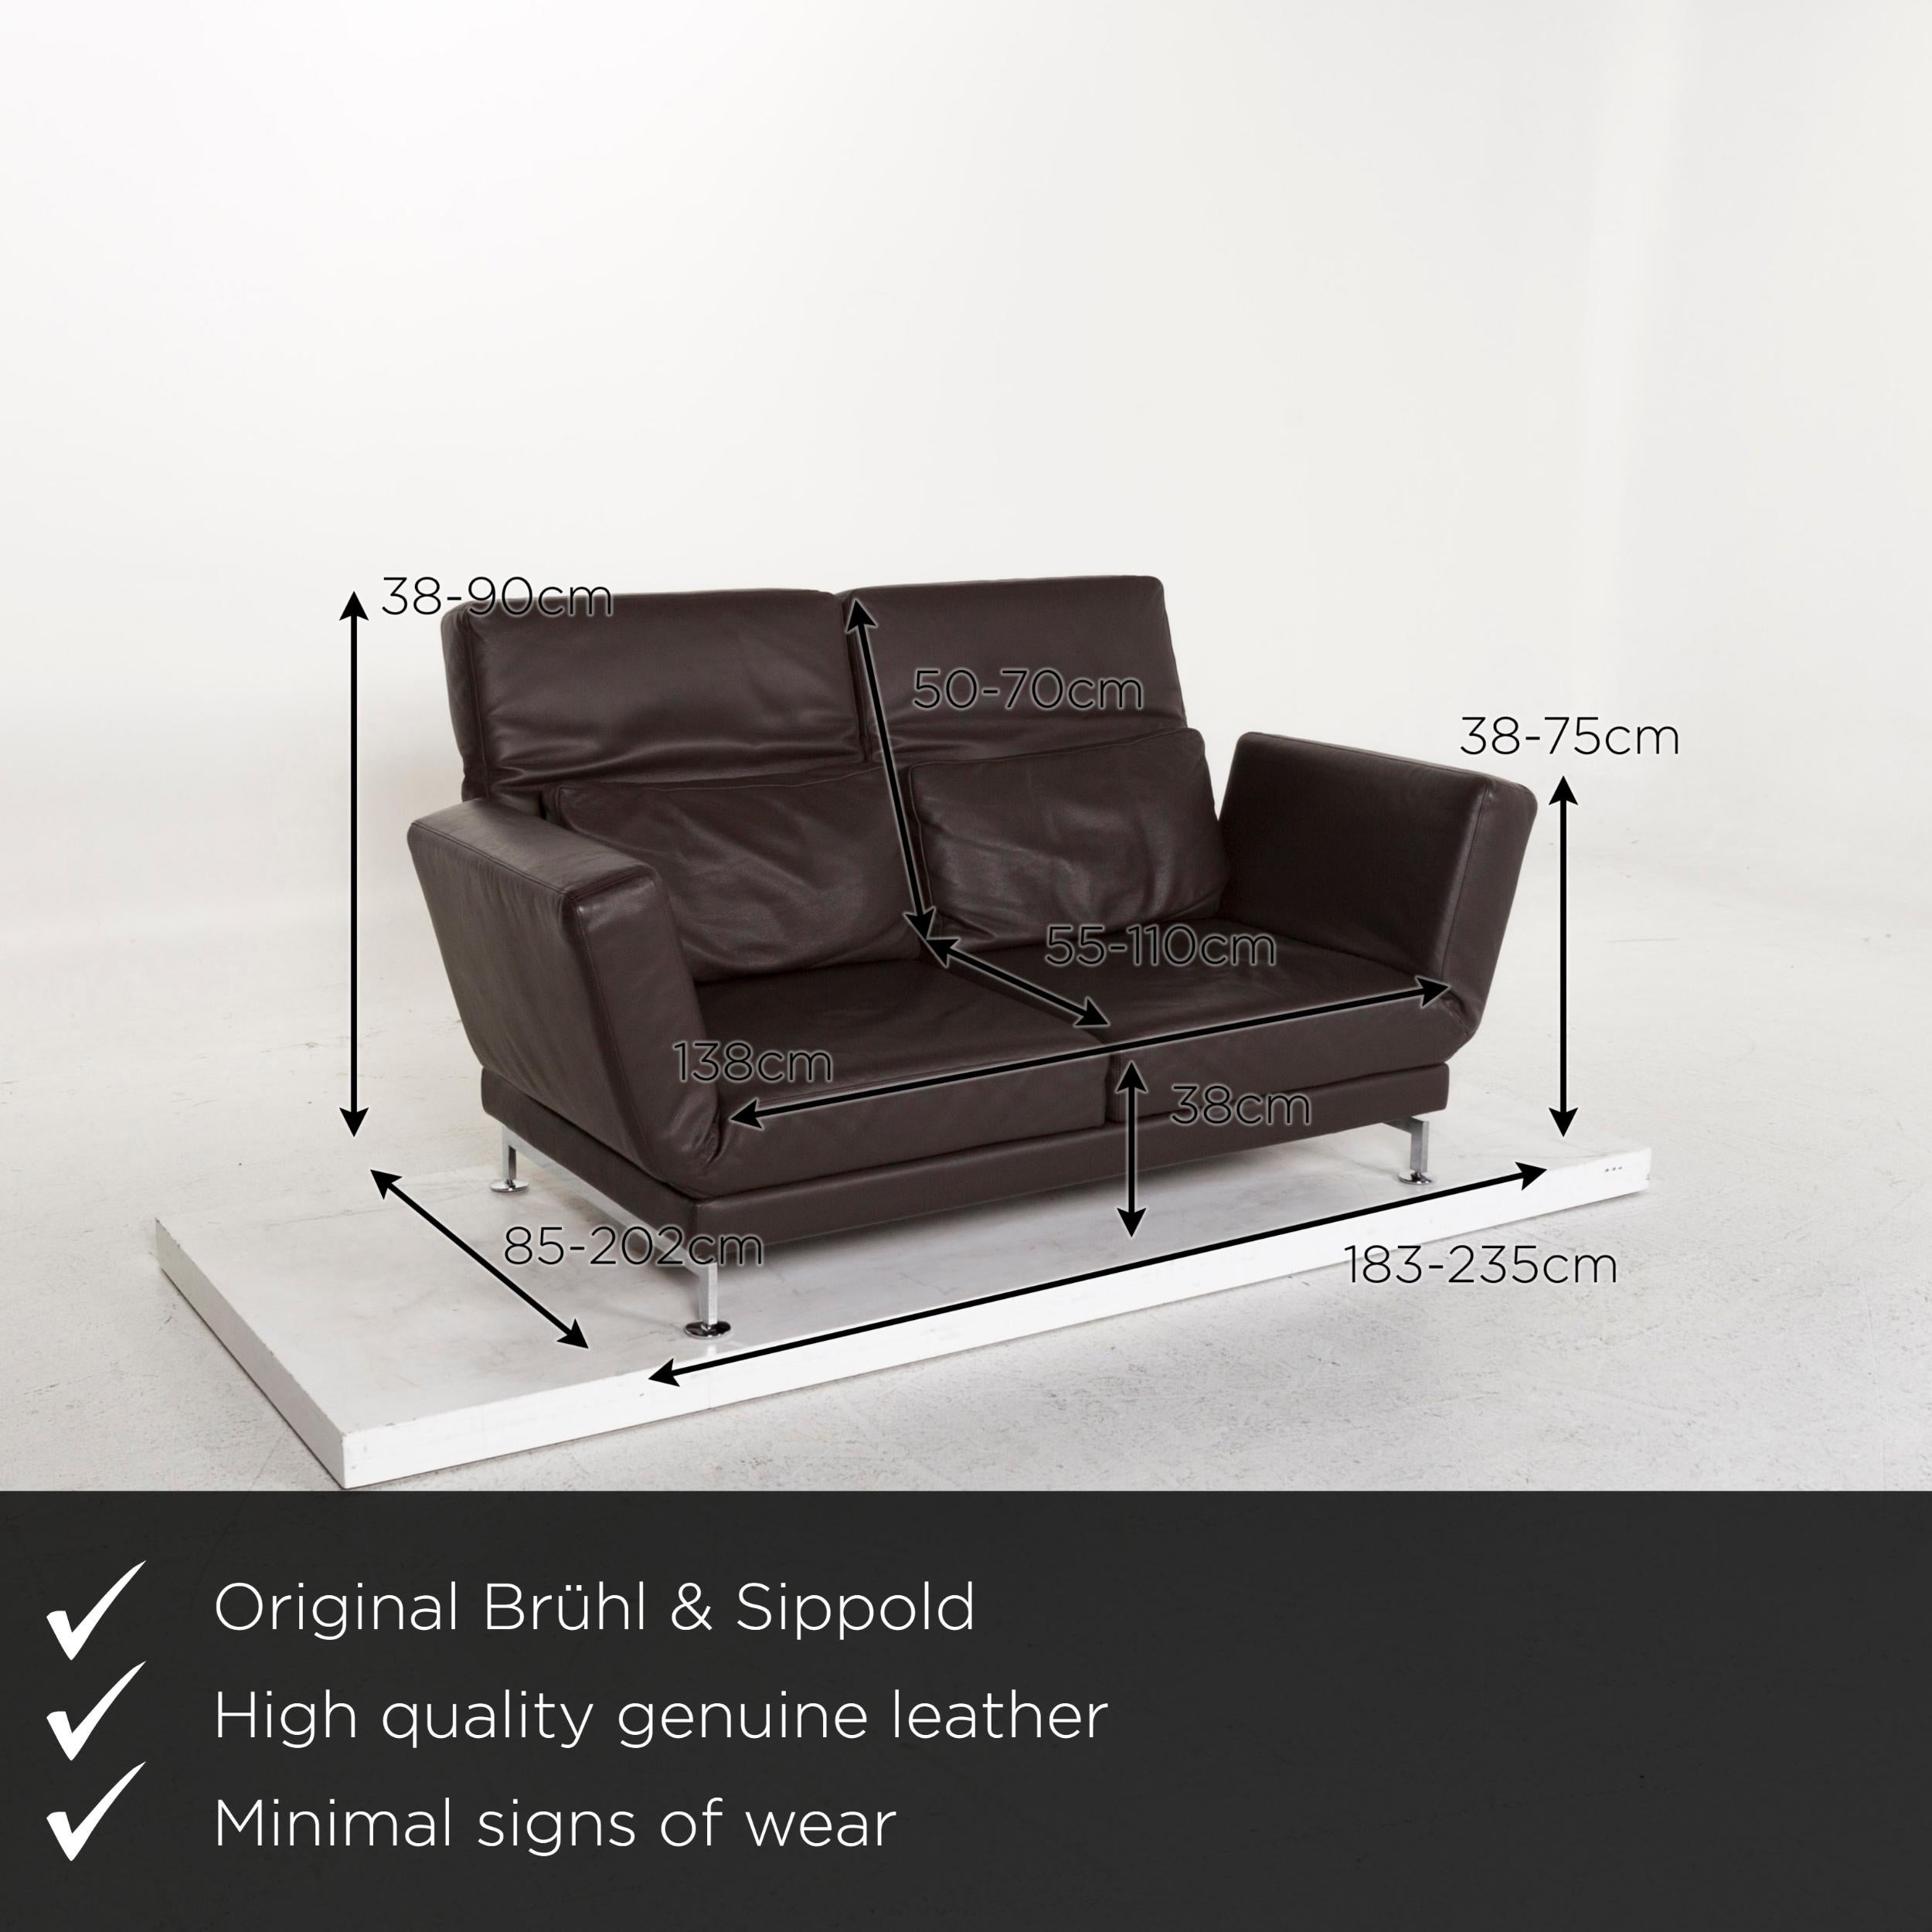 We present to you a Brühl & Sippold Moule leather sofa brown dark brown relax function couch.
 

 Product measurements in centimeters:
 

Depth 85
Width 183
Height 90
Seat height 38
Rest height 38
Seat depth 55
Seat width 138
Back